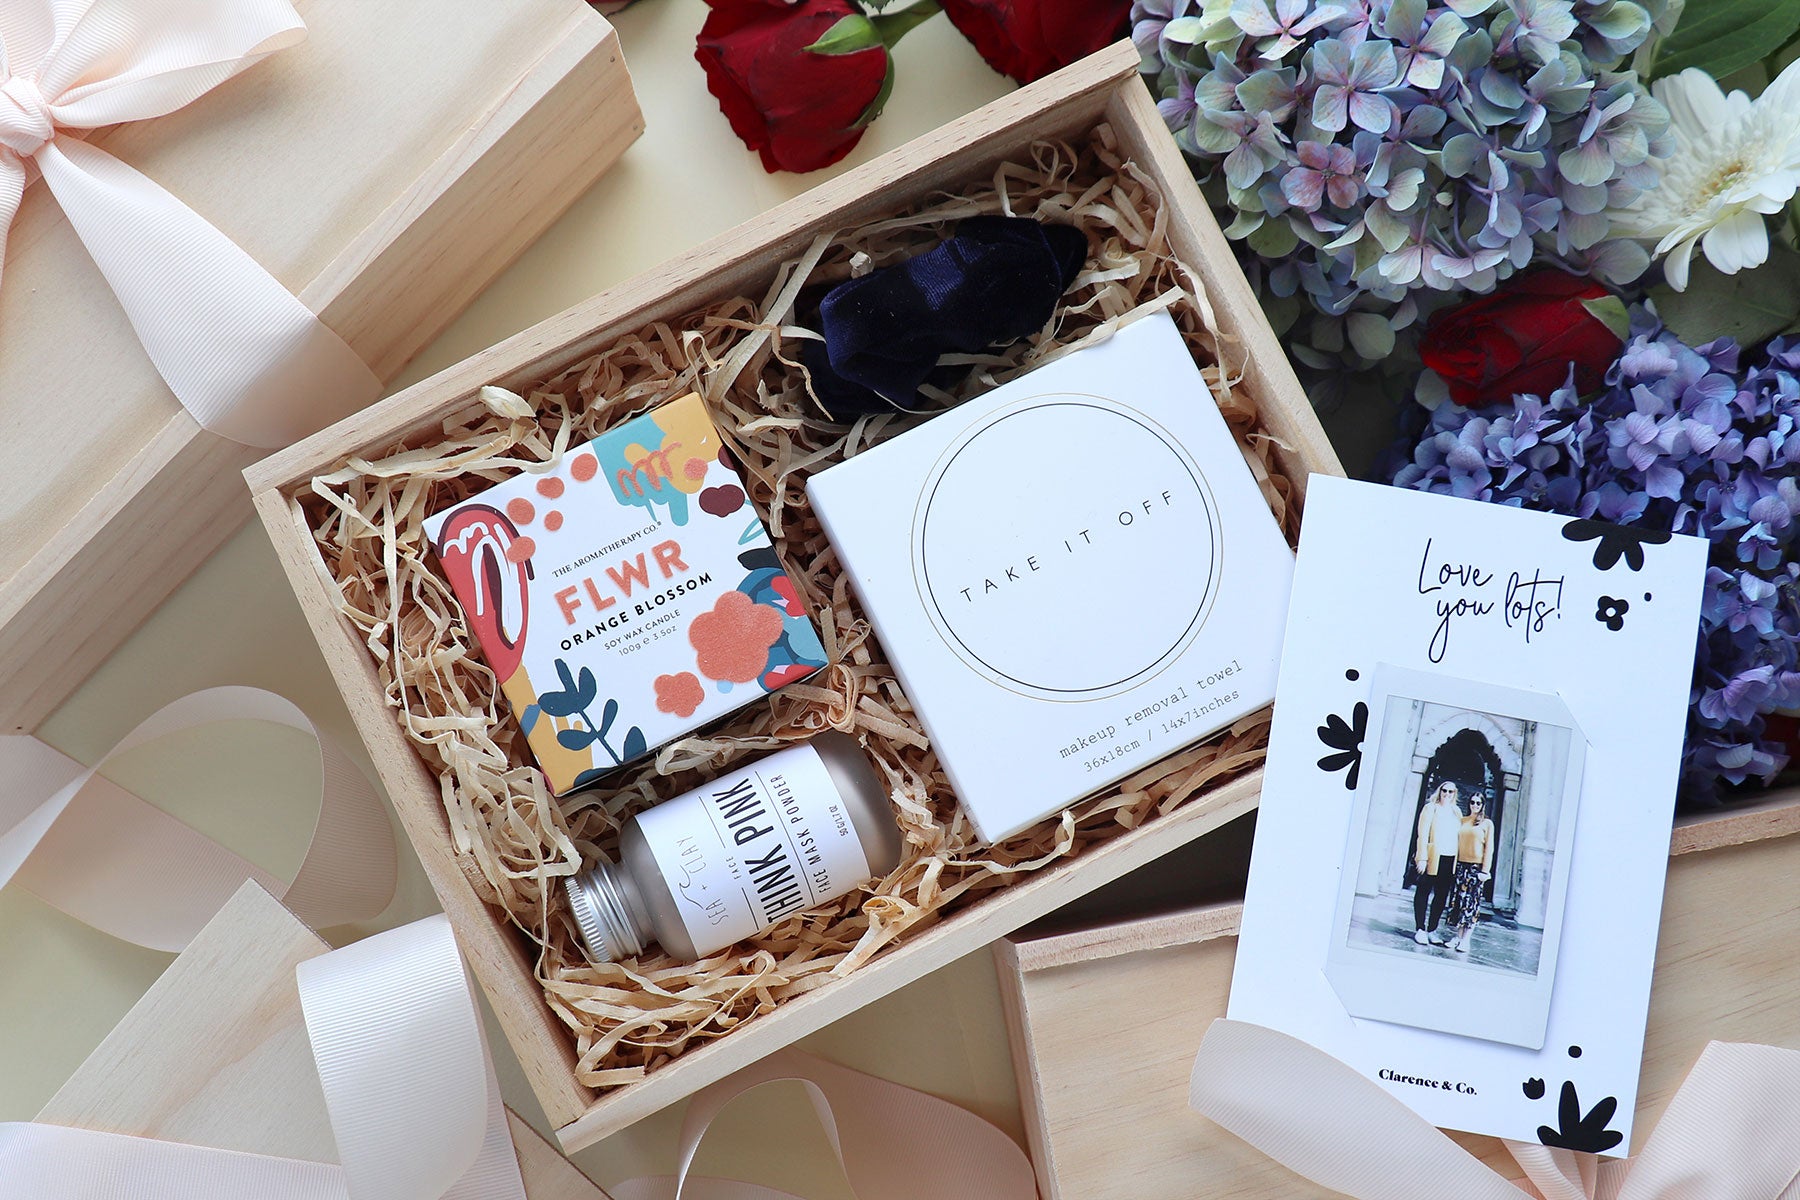 Pamper hamper NZ made gift box for her - thinking of you present NZ-made with personalised card - fast NZ shipping